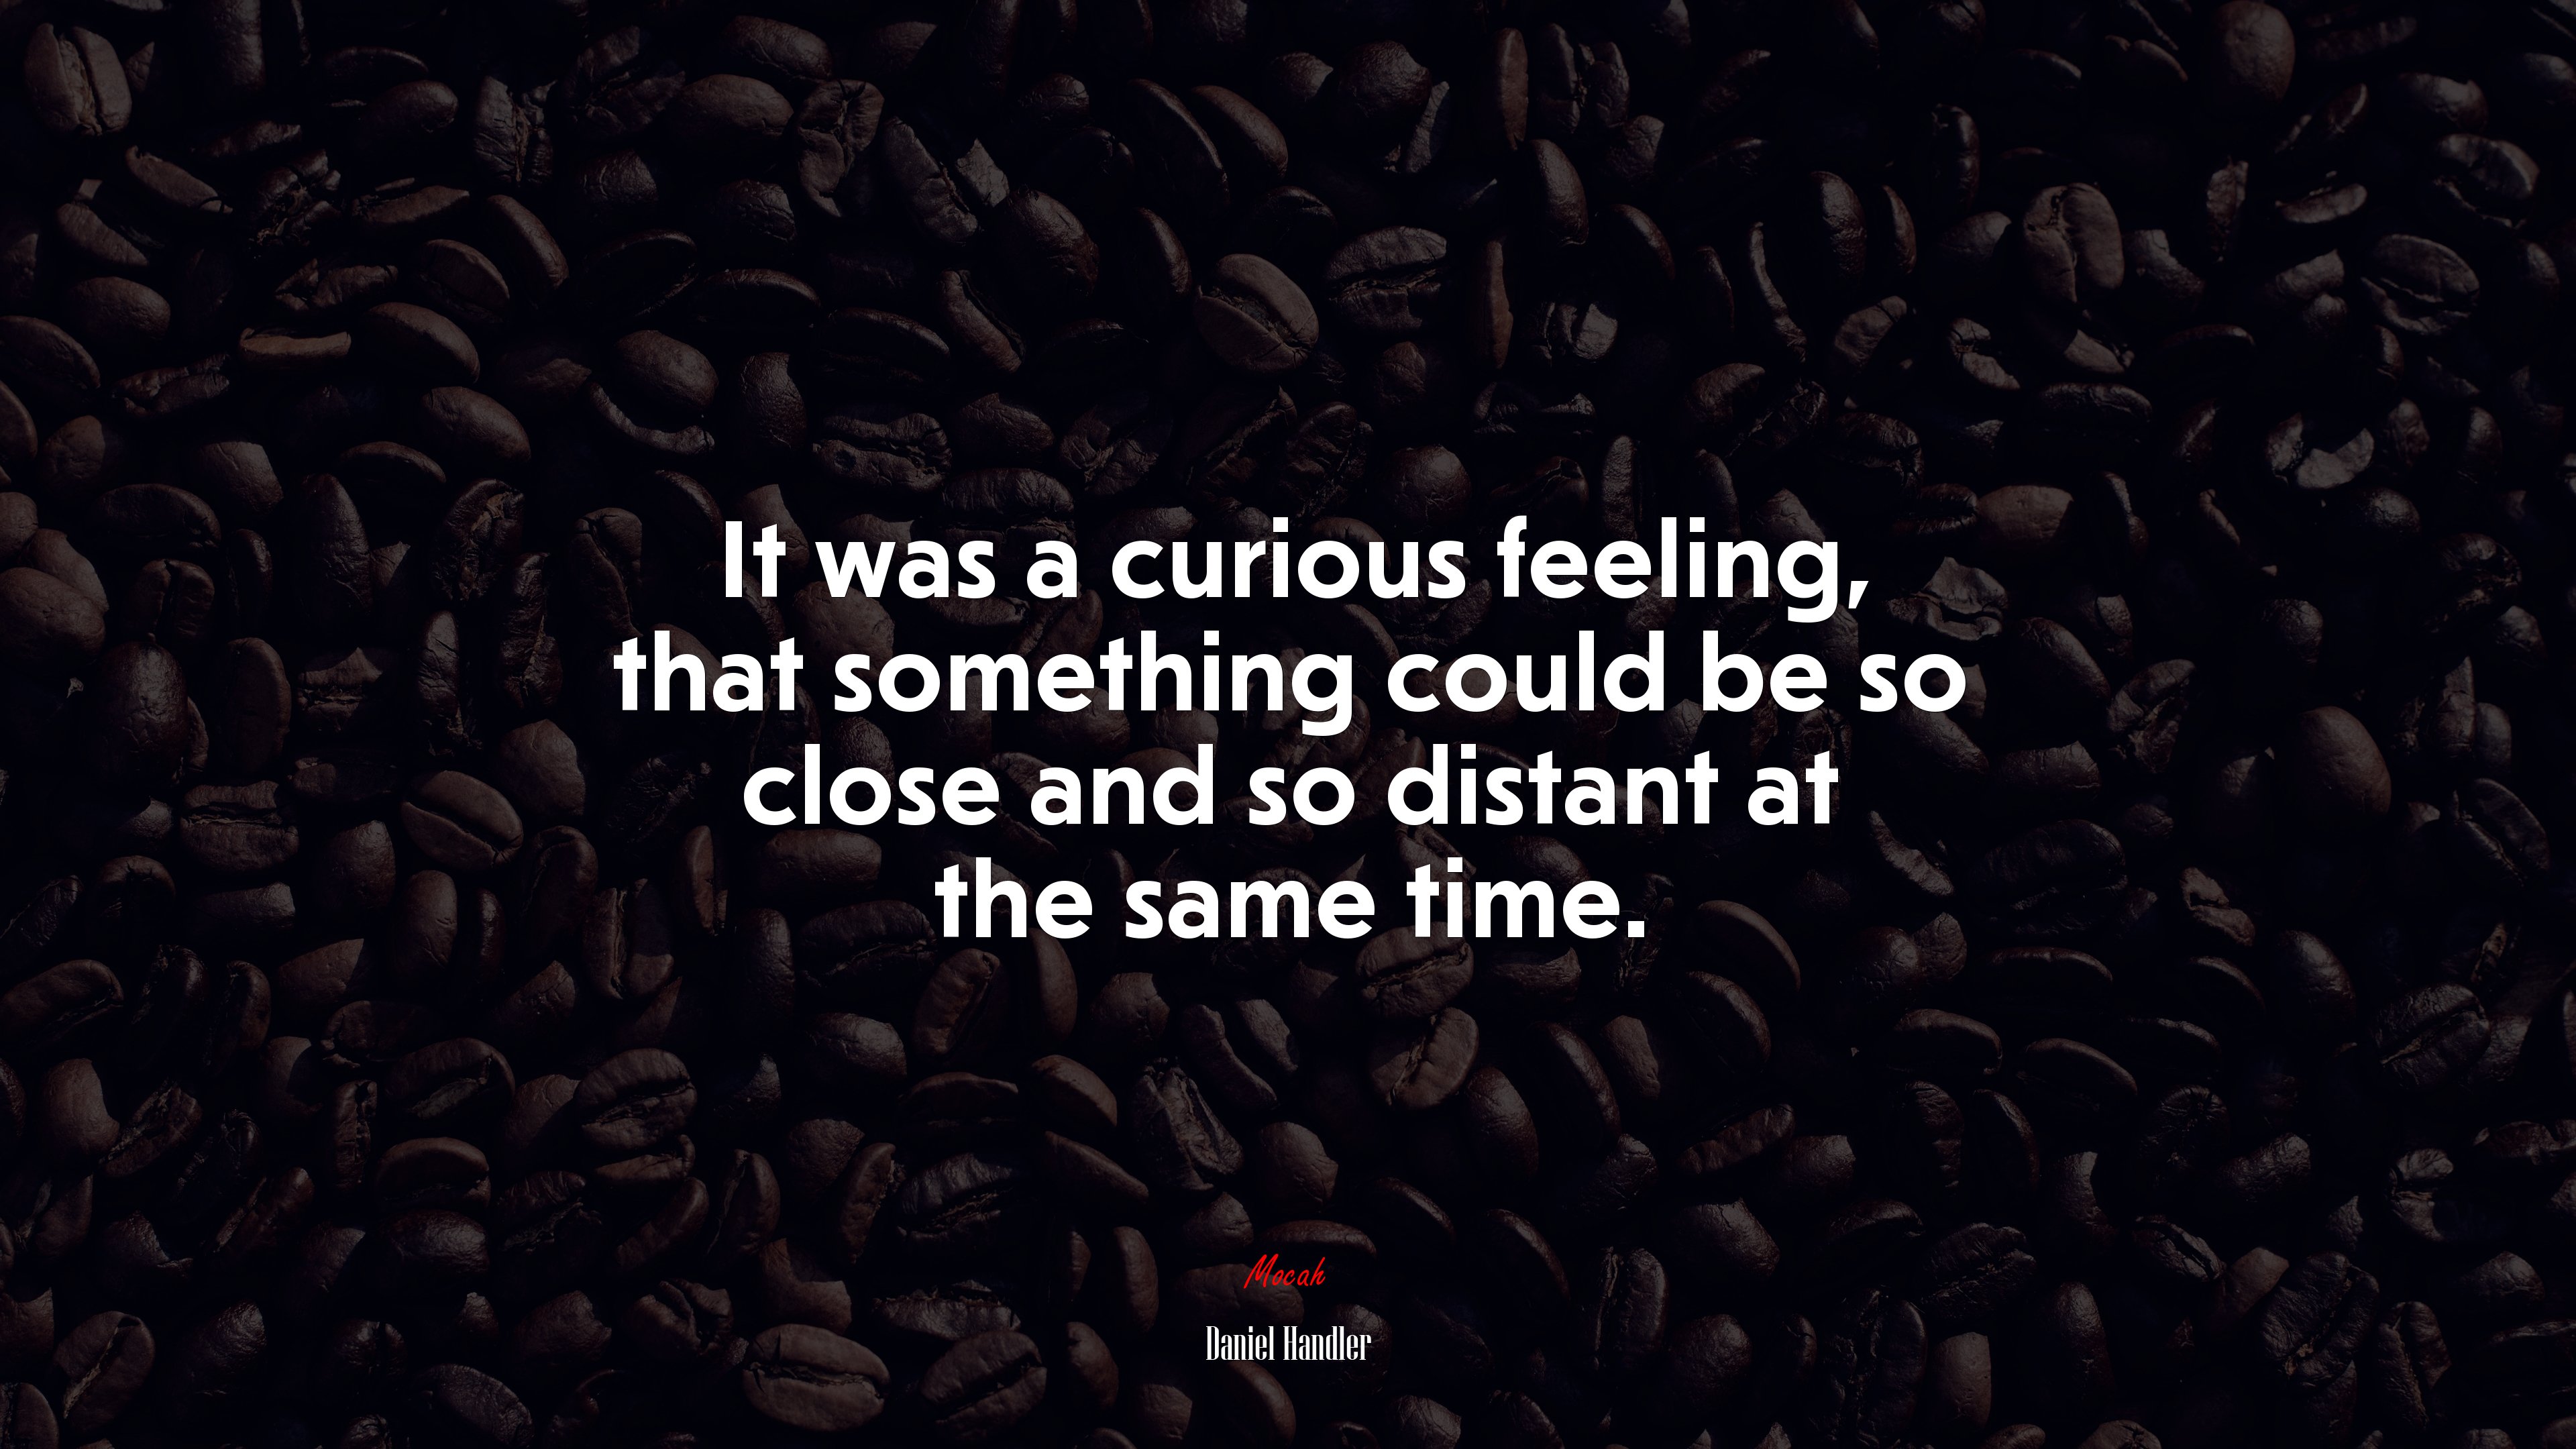 It was a curious feeling that something could be so close and so distant at the same time daniel handler quote